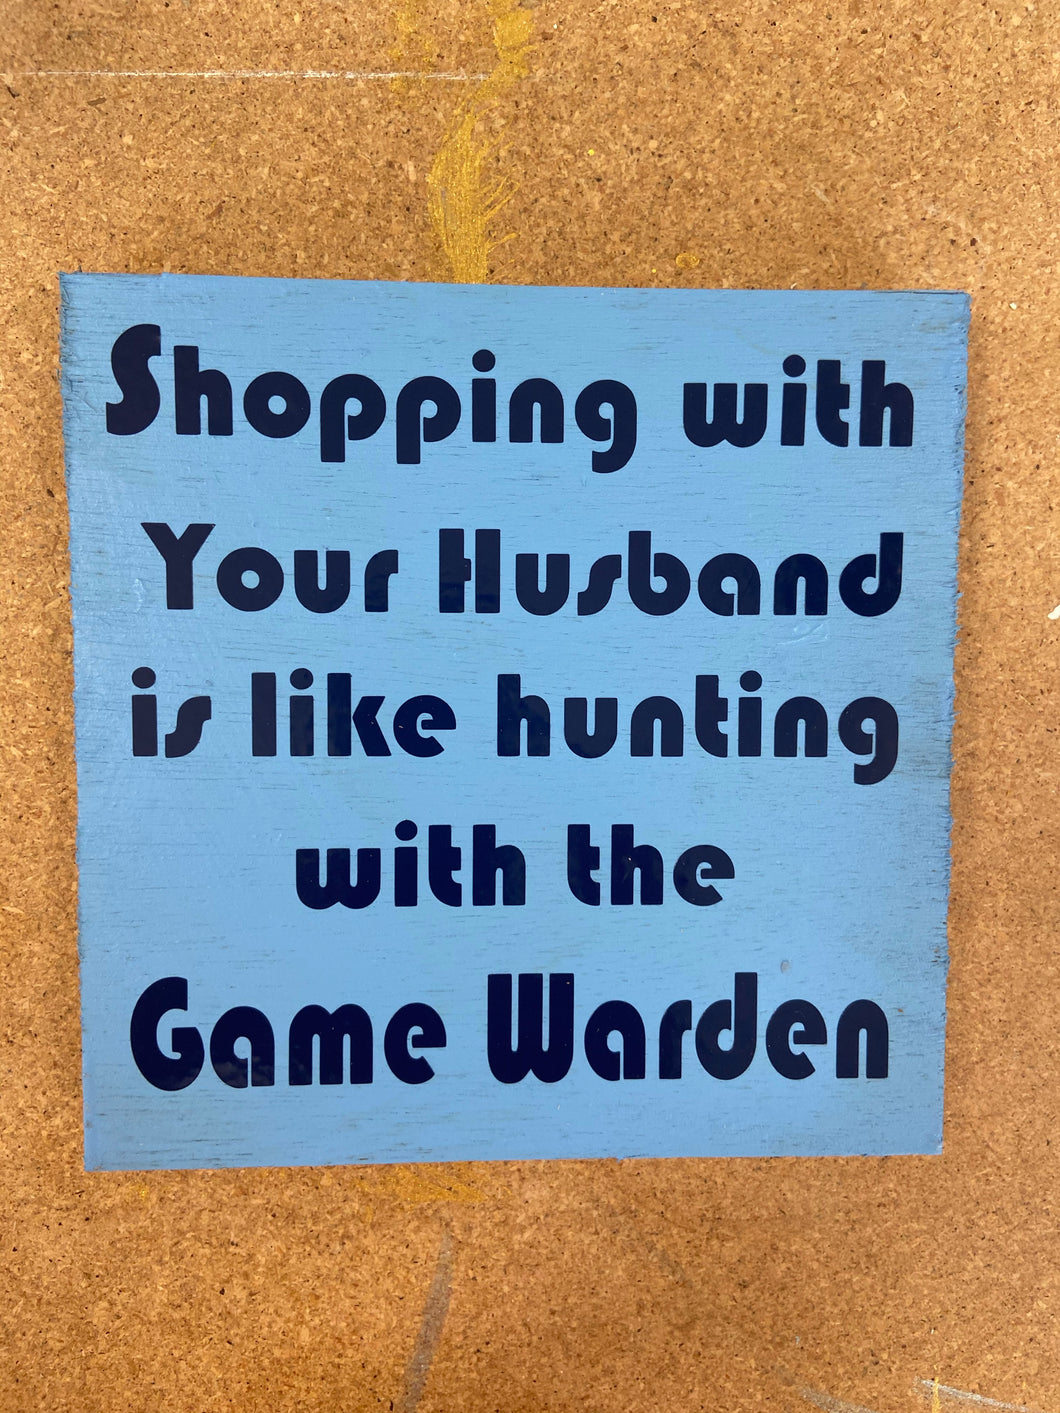 Shopping with your husband